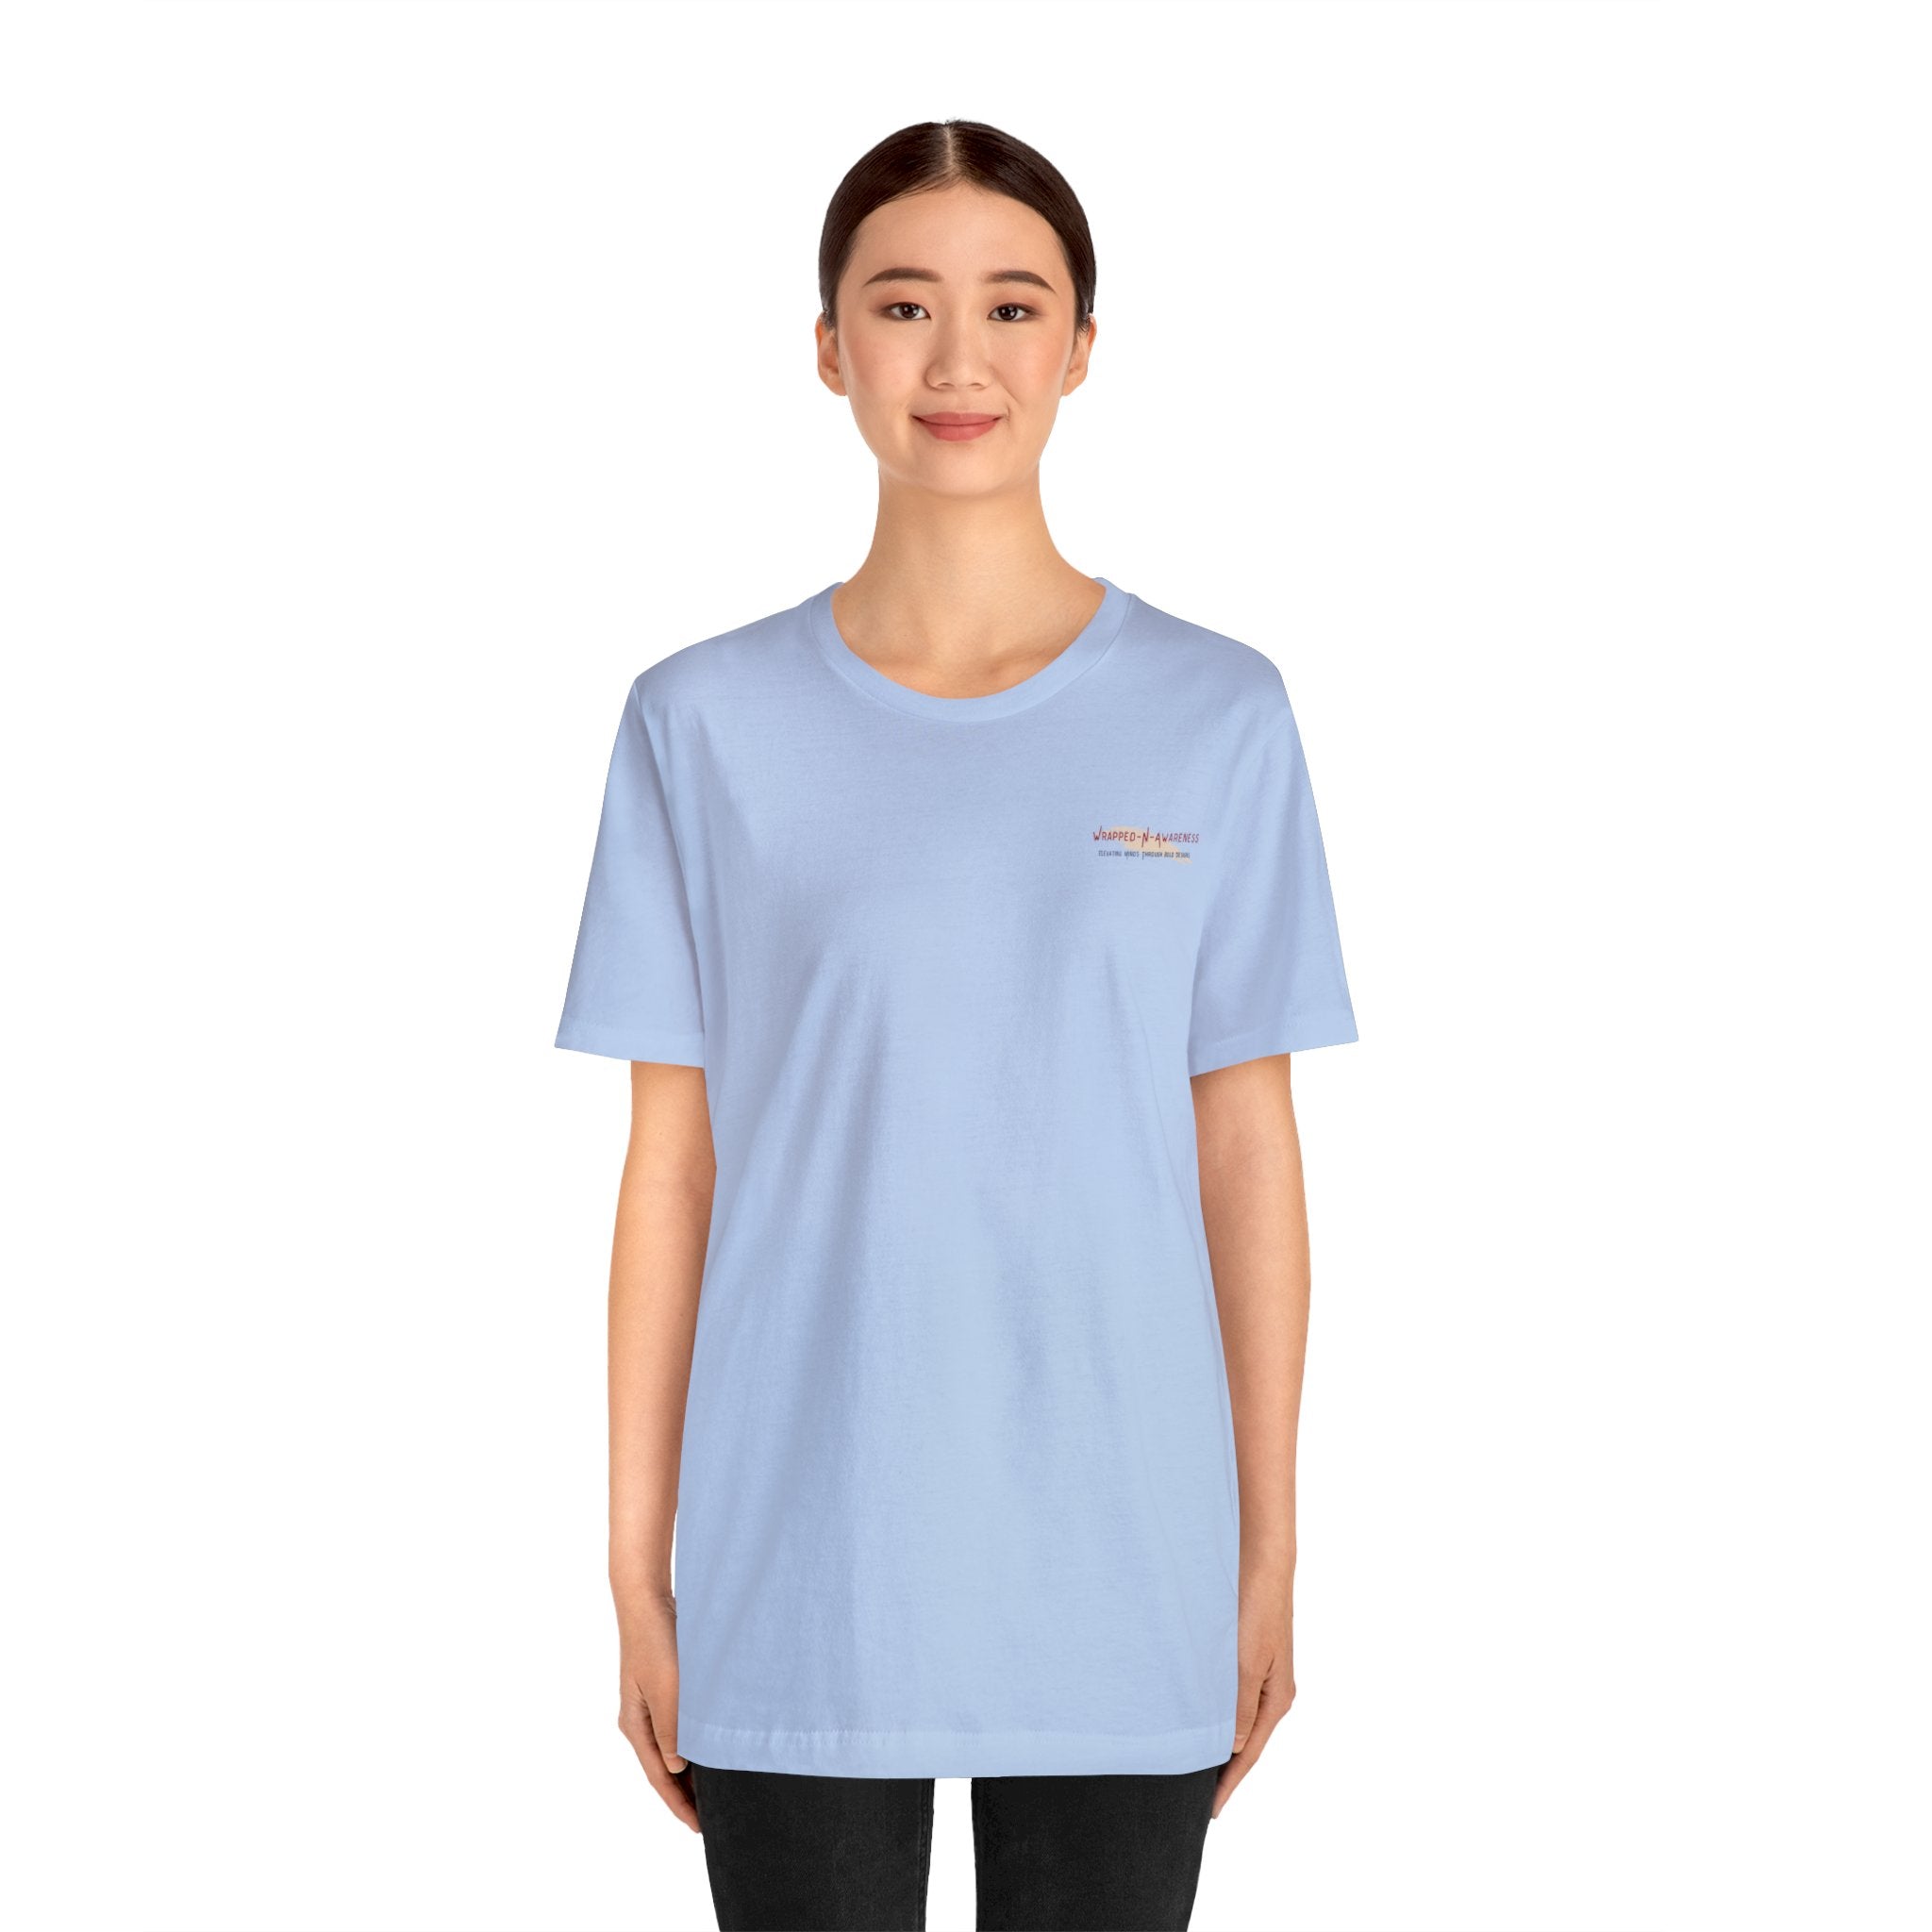 Inspire Growth Jersey Tee - Bella+Canvas 3001 Turquoise Airlume Cotton Bella+Canvas 3001 Crew Neckline Jersey Short Sleeve Lightweight Fabric Mental Health Support Retail Fit Tear-away Label Tee Unisex Tee T-Shirt 12356595252811110388_2048 Printify